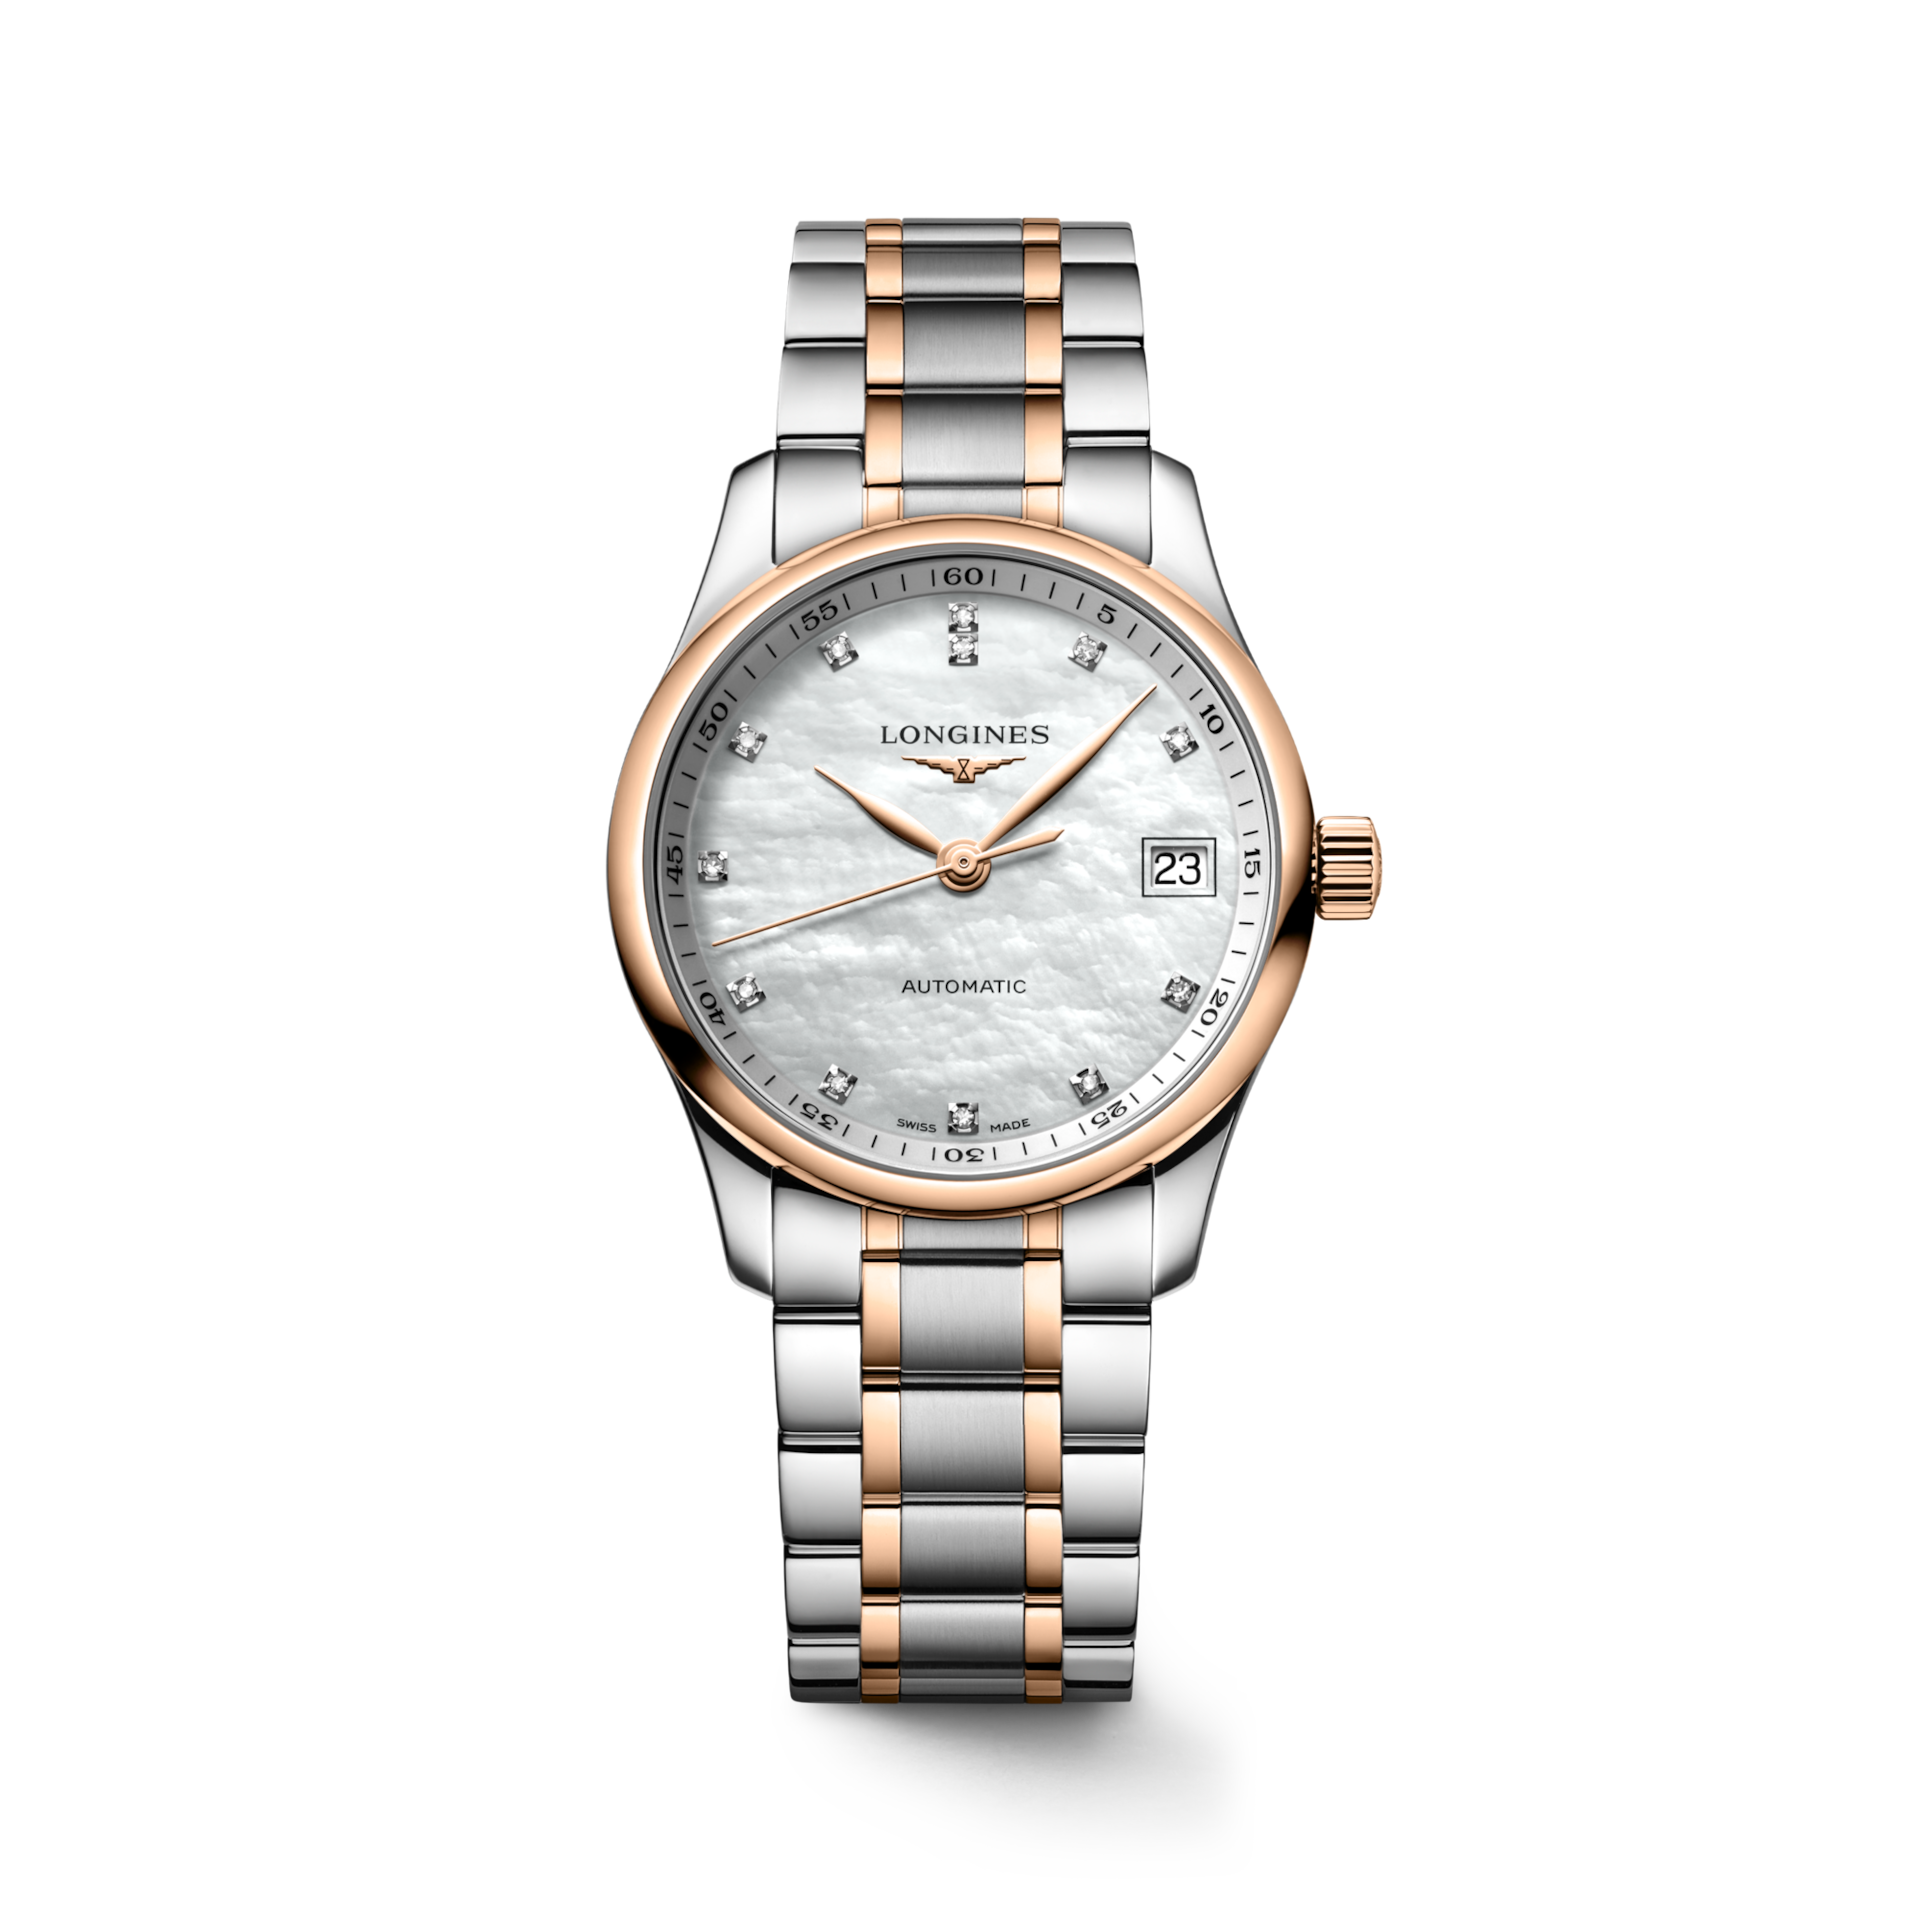 THE LONGINES MASTER COLLECTIONL2.357.5.89.7 L2.357.5.89.7